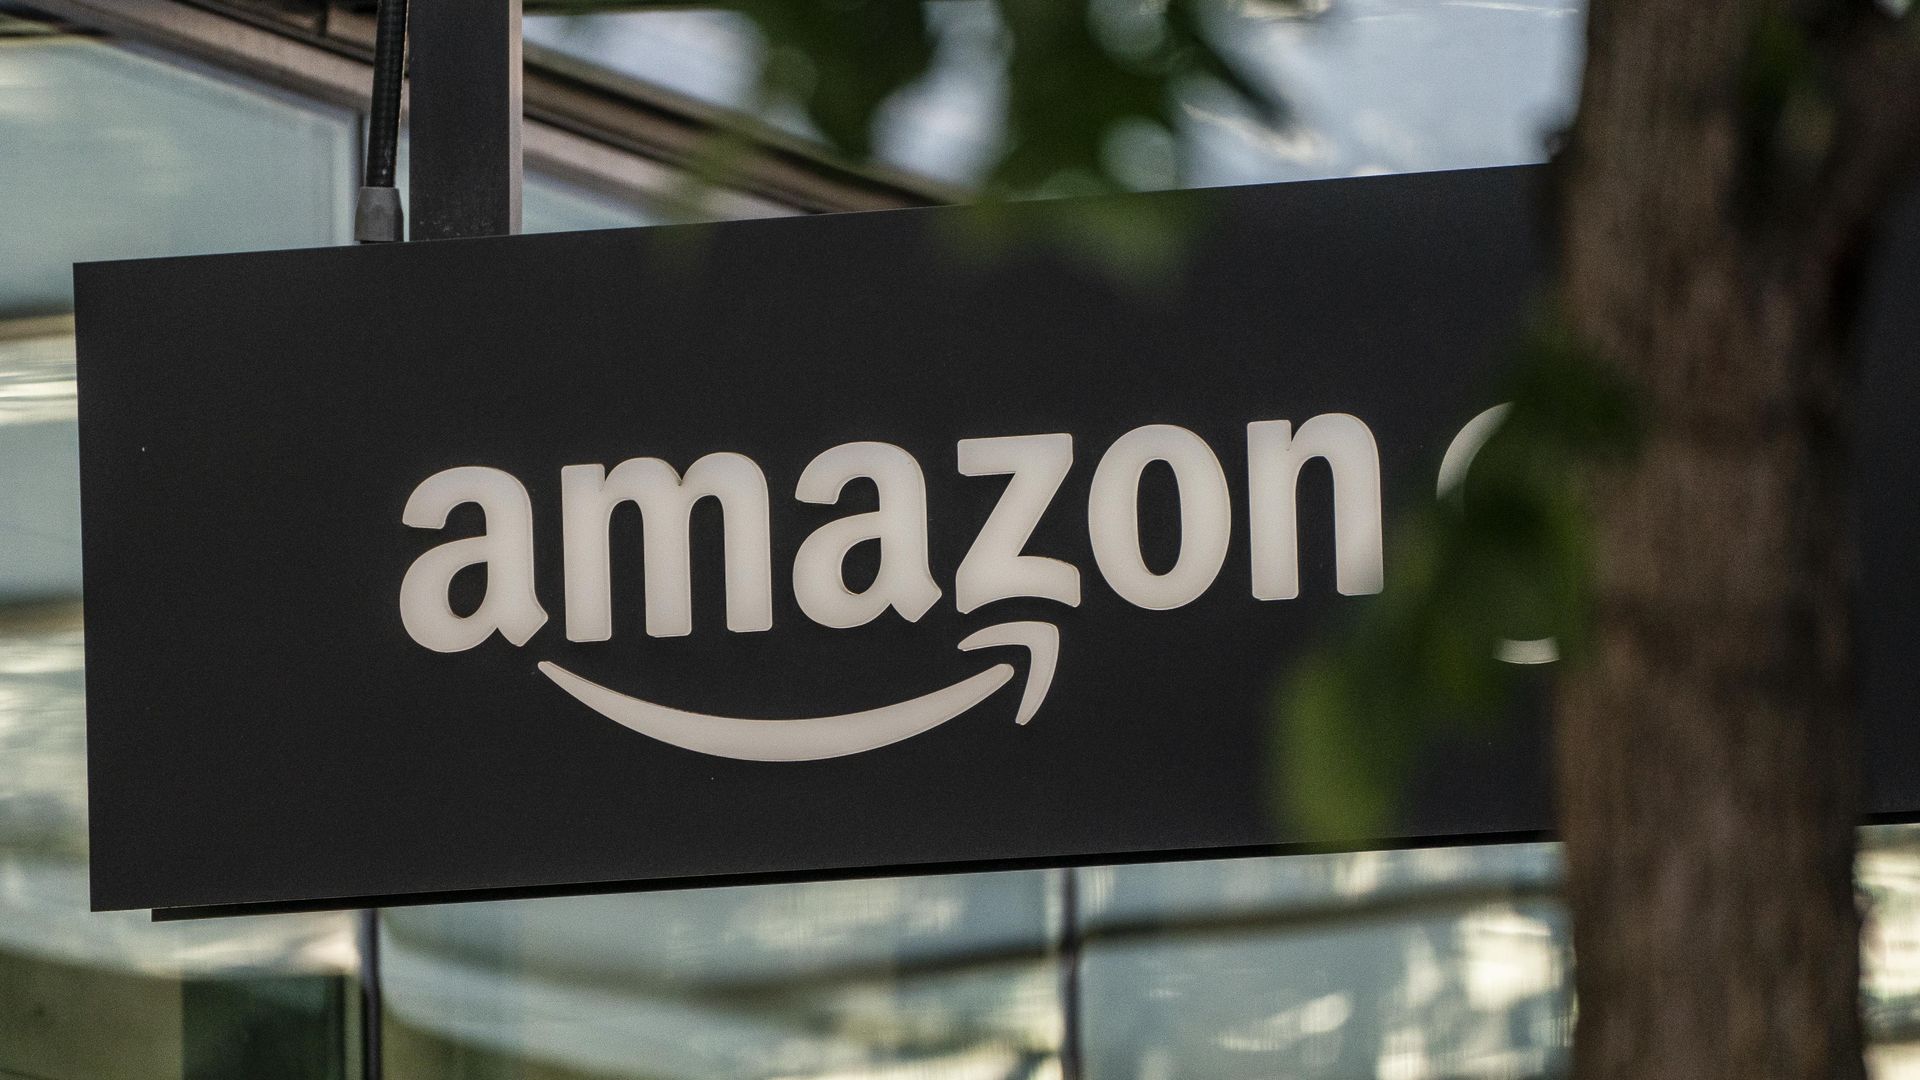 Photo of the Amazon logo on a sign.